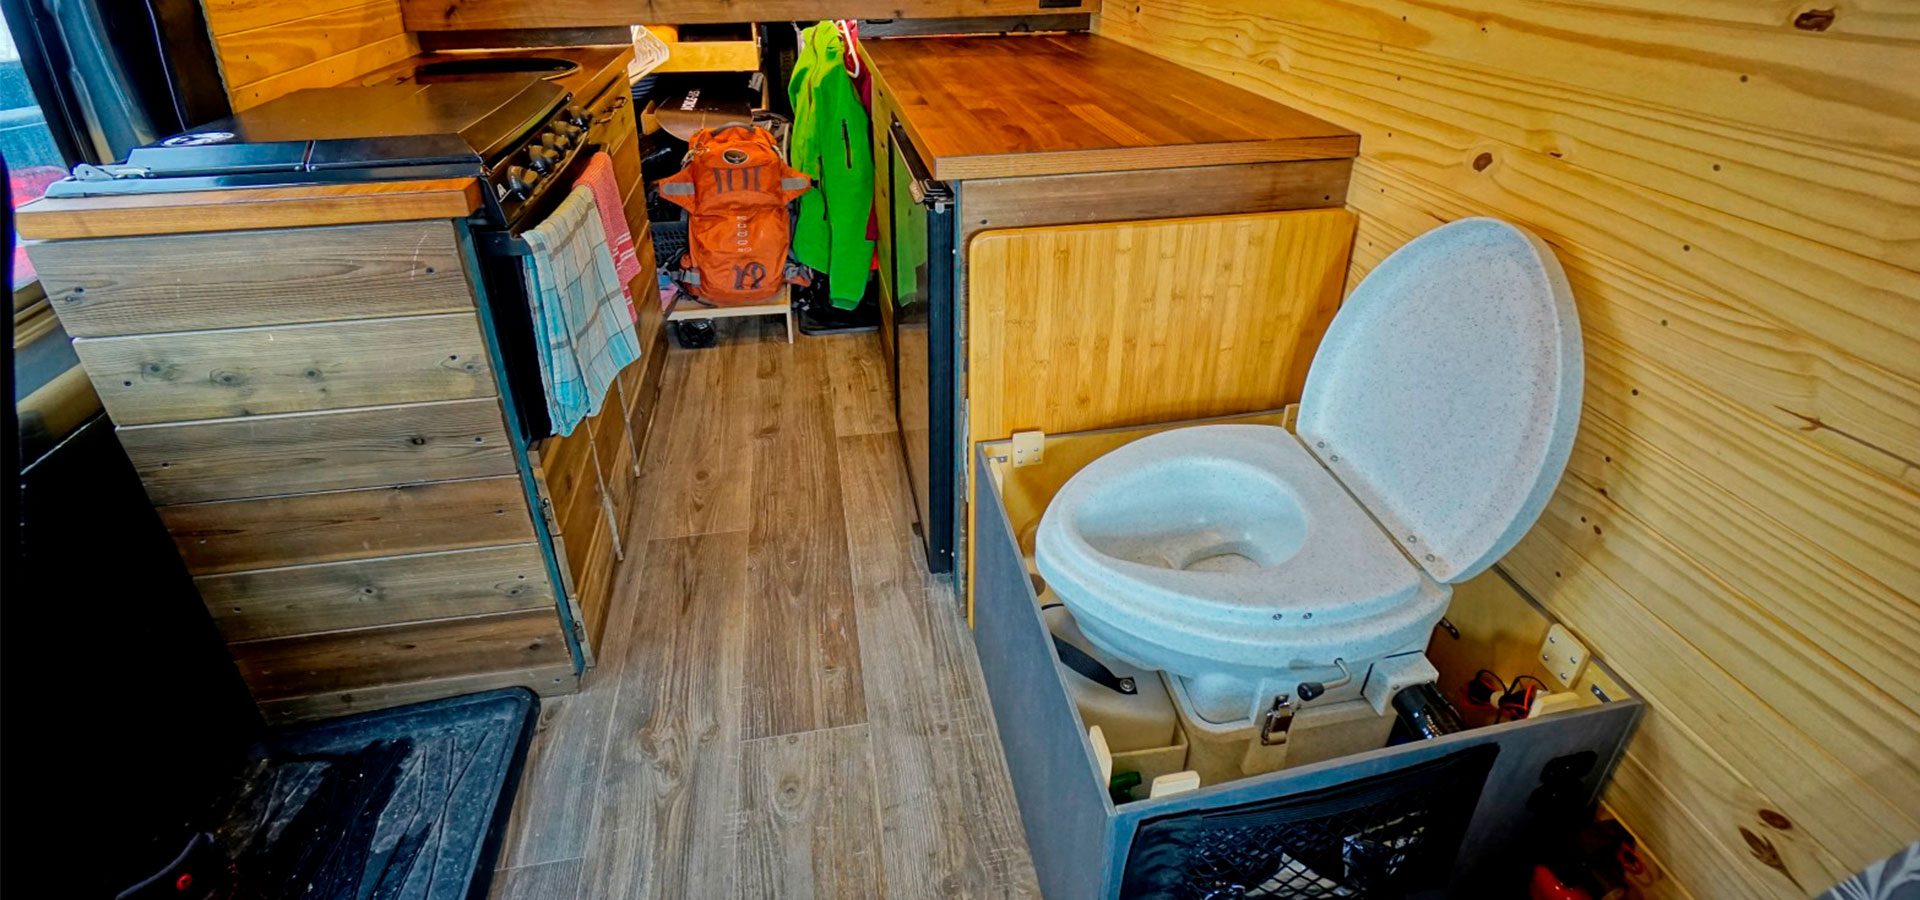 Natures-Head-Composting-Toilet-Tiny-Home